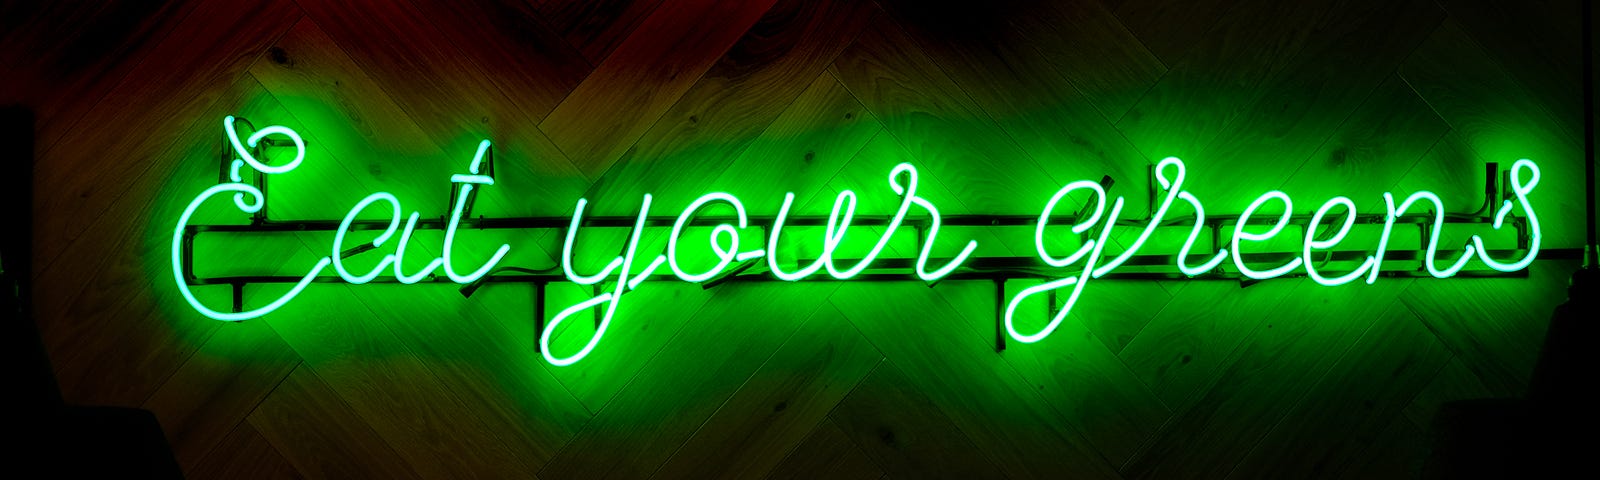 A green neon sign says Eat your greens on a dark wood chevron wall.